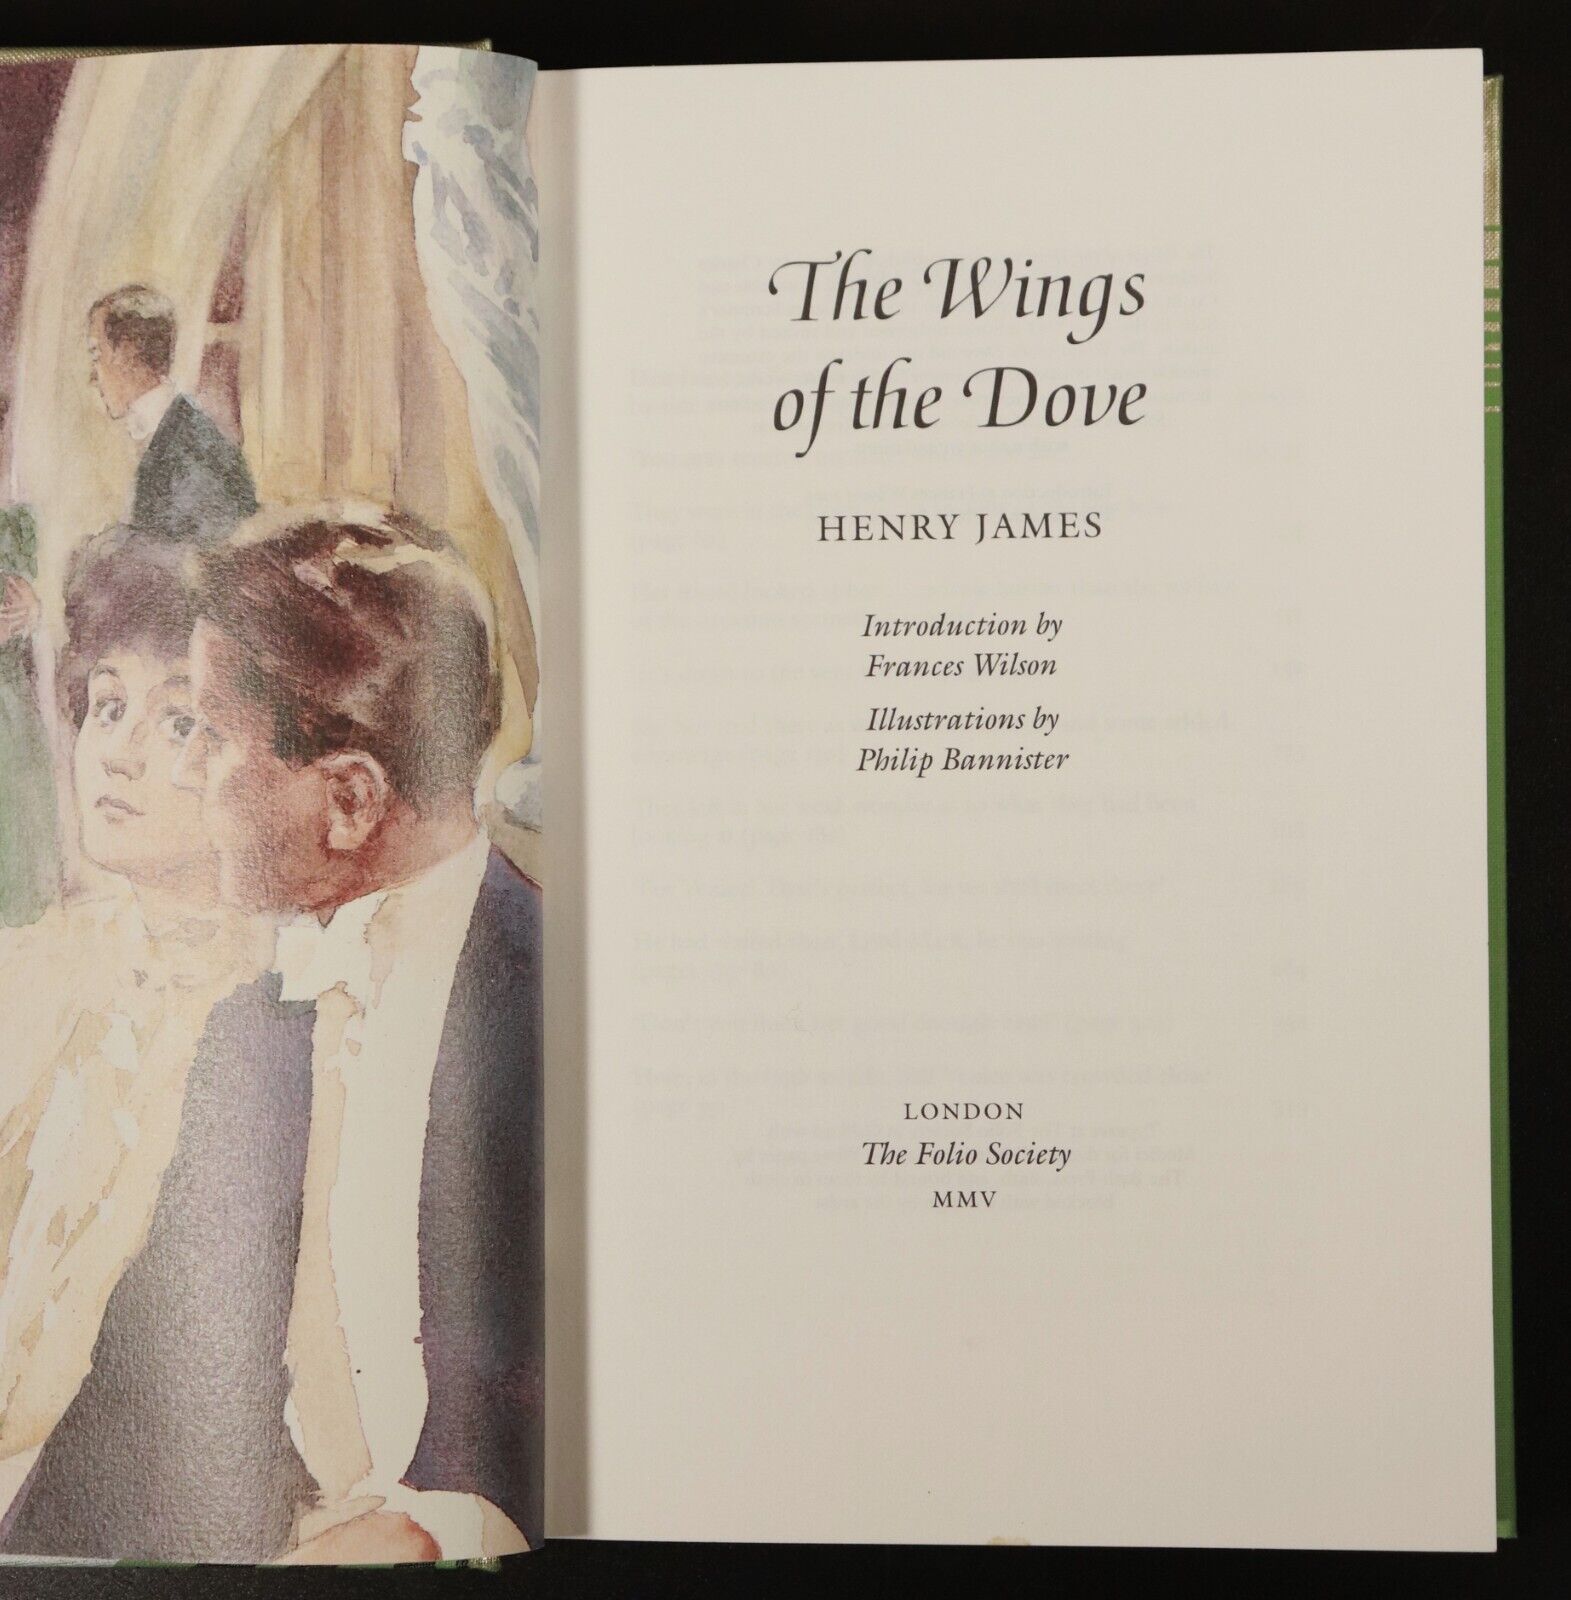 2005 The Wings Of The Dove by Henry James Folio Society Classic Fiction Book